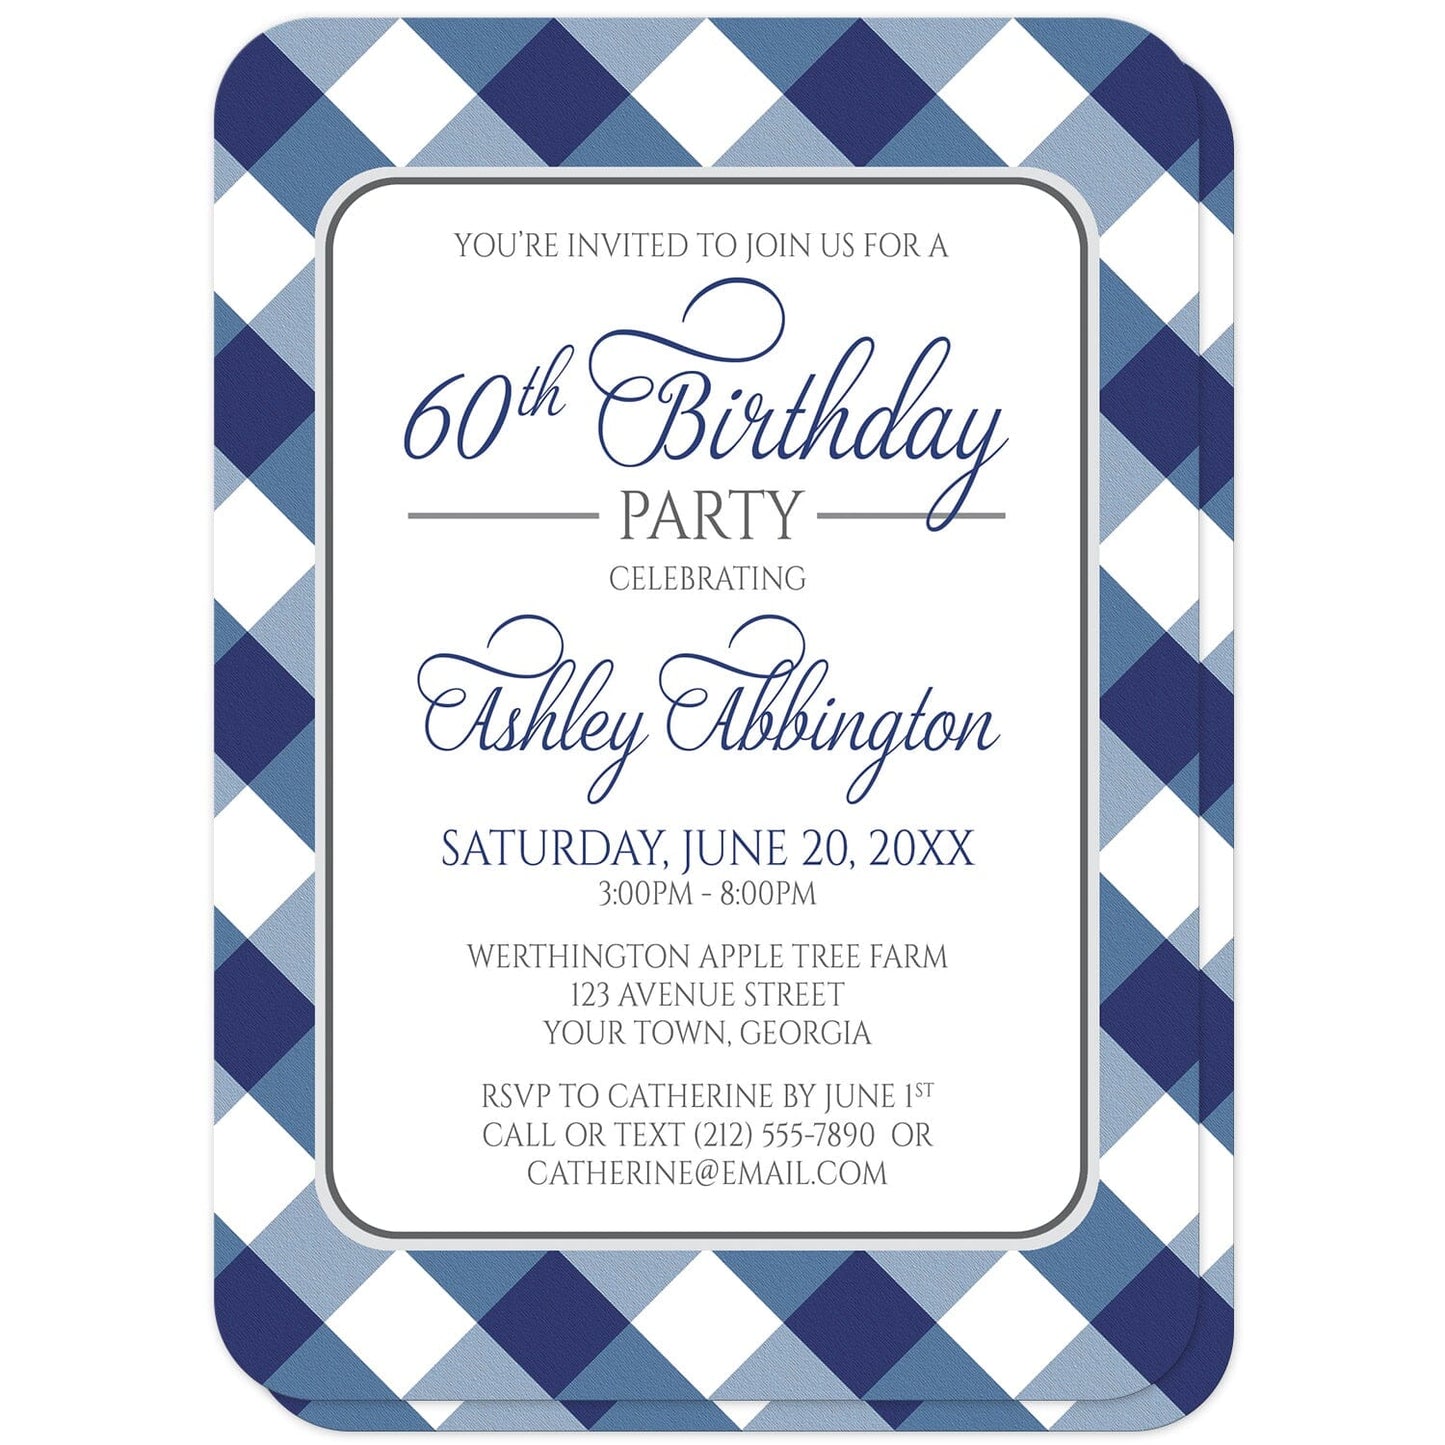 Navy Blue Gingham Birthday Party Invitations (with rounded corners) at Artistically Invited. Navy blue gingham birthday party invitations with your personalized party details custom printed in blue and gray inside a white rectangular area outlined in gray. The background design is a diagonal blue and white gingham pattern which is also printed on the back side. 